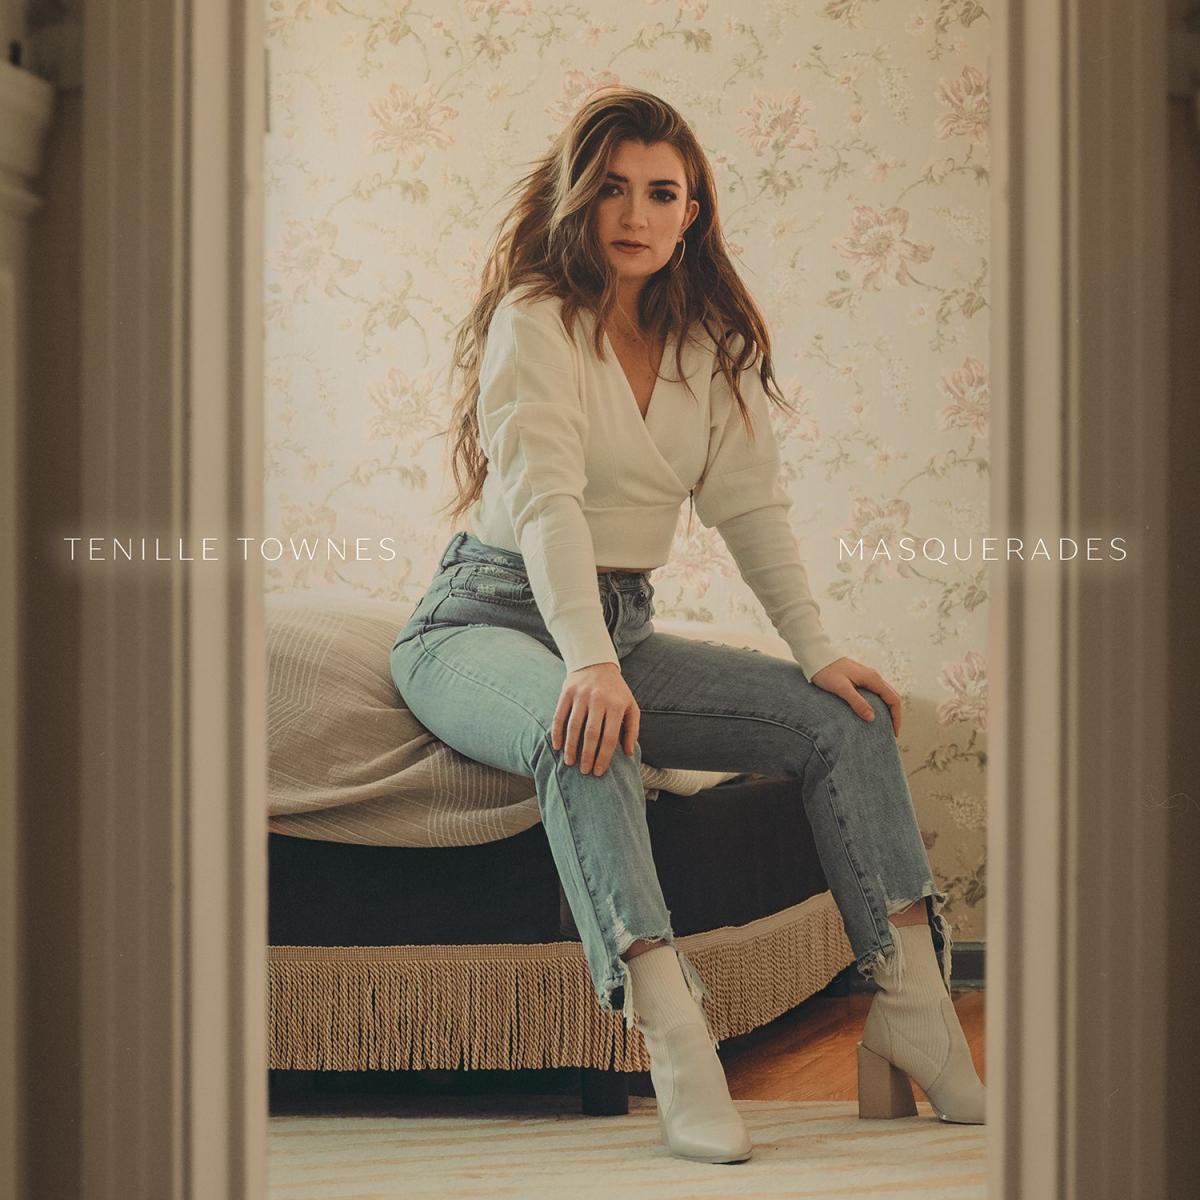 Tenille Townes Reveals Tracklisting For Upcoming EP 'Masquerades' Out On 22 April